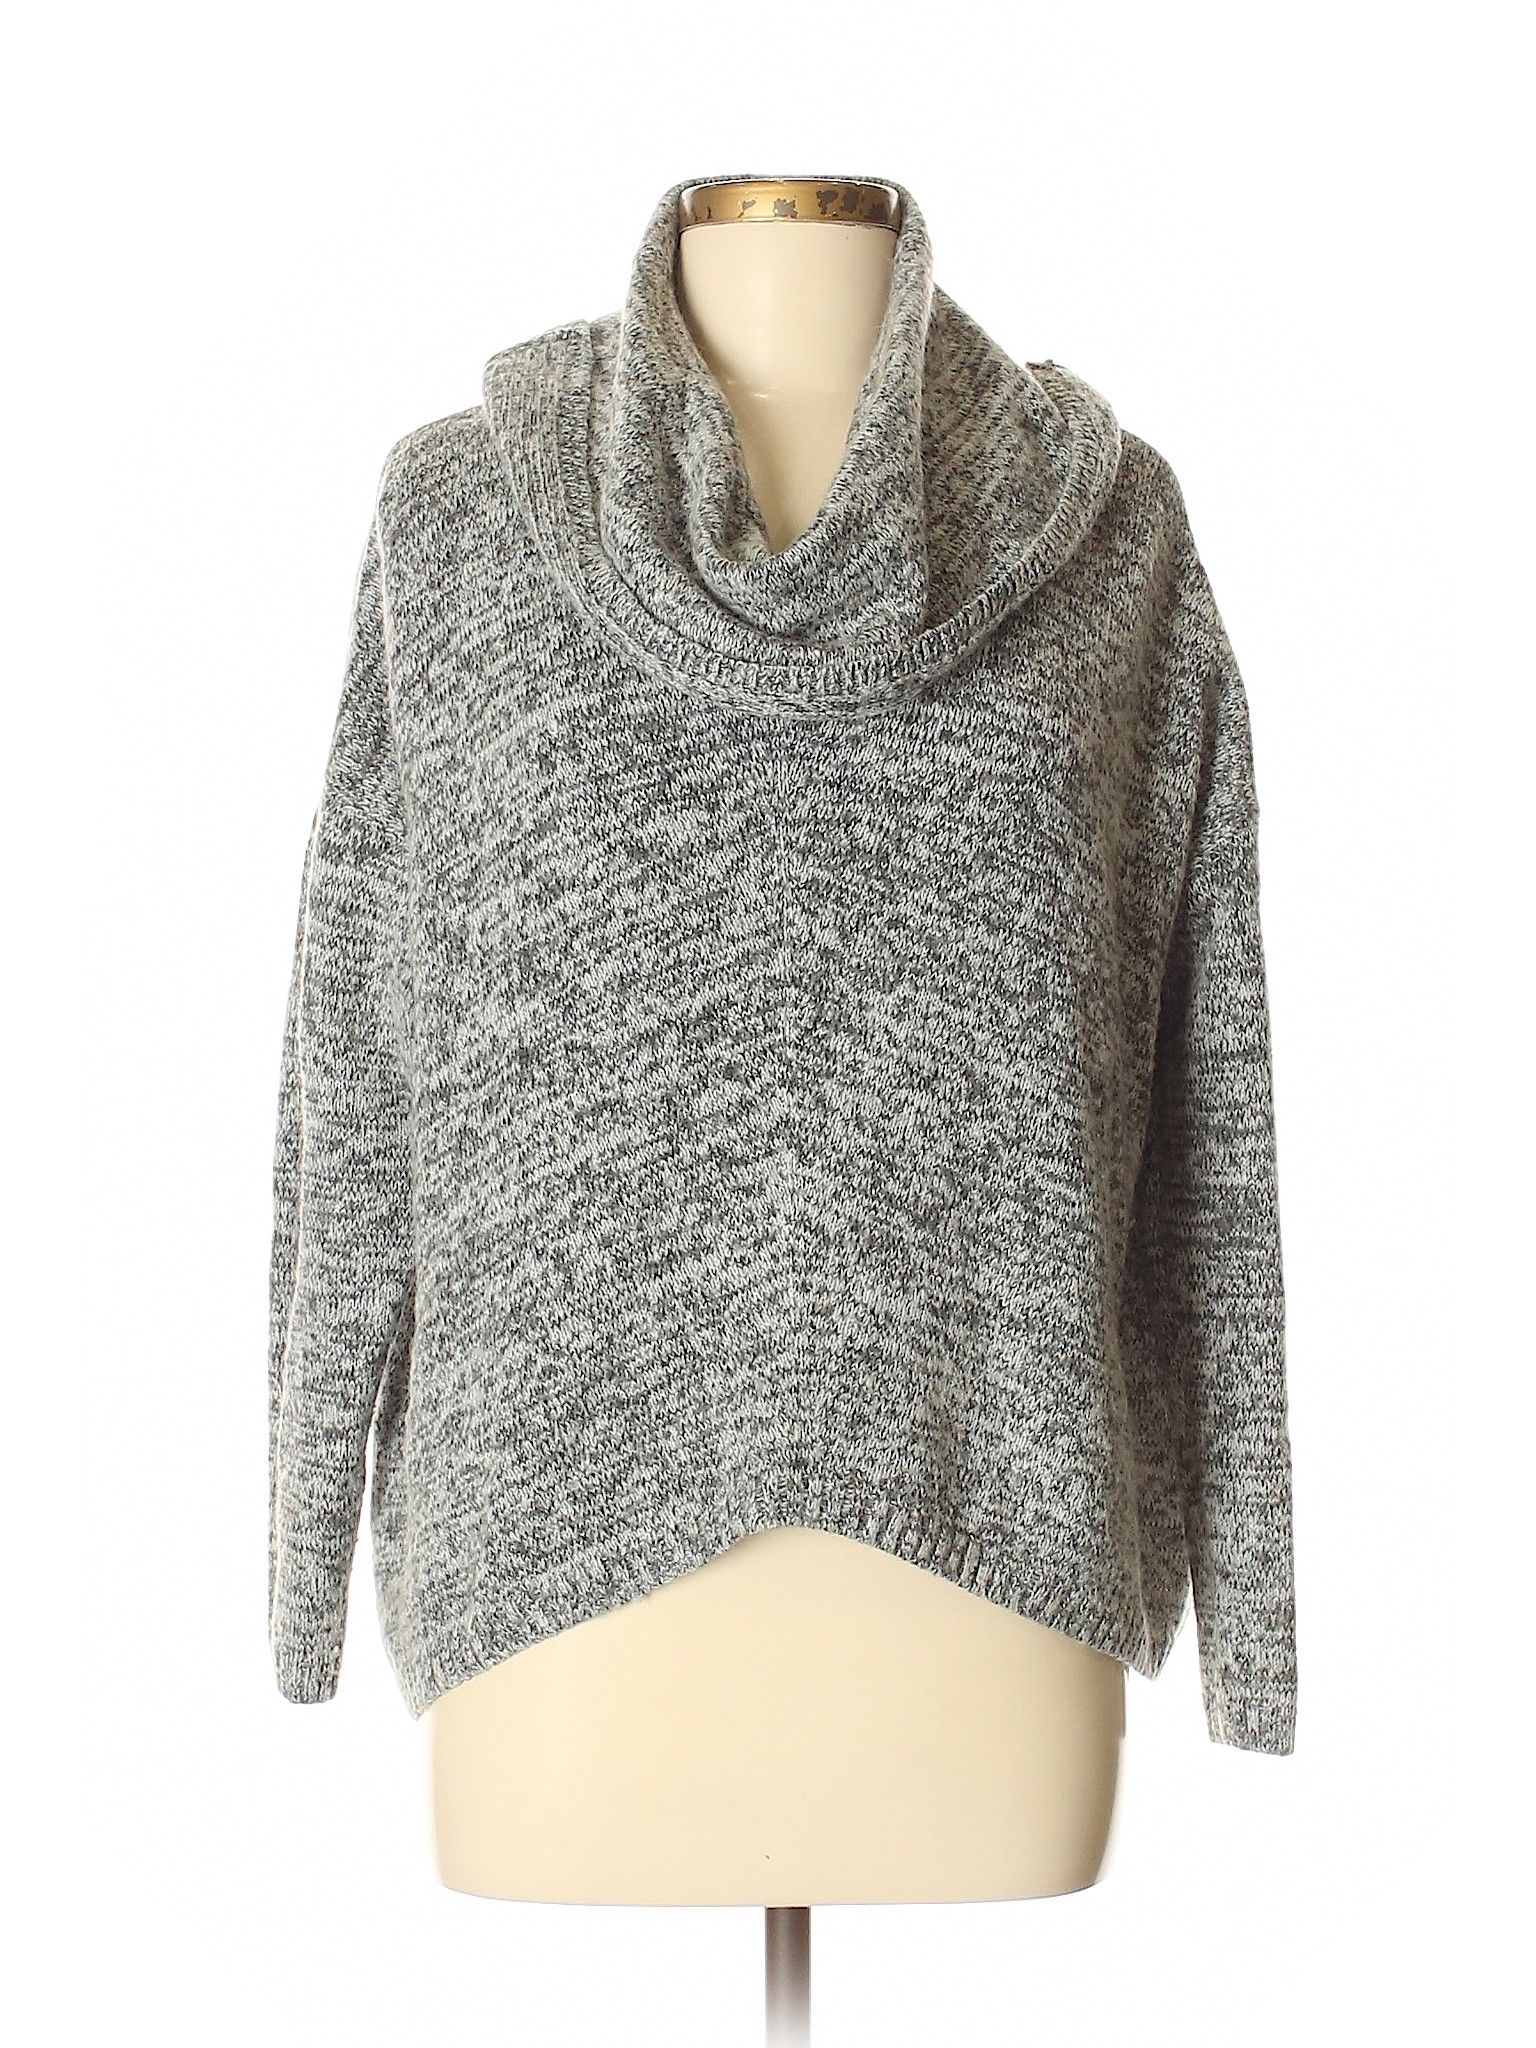 Express Pullover Sweater Size 8: Gray Women's Tops - 45304515 | thredUP